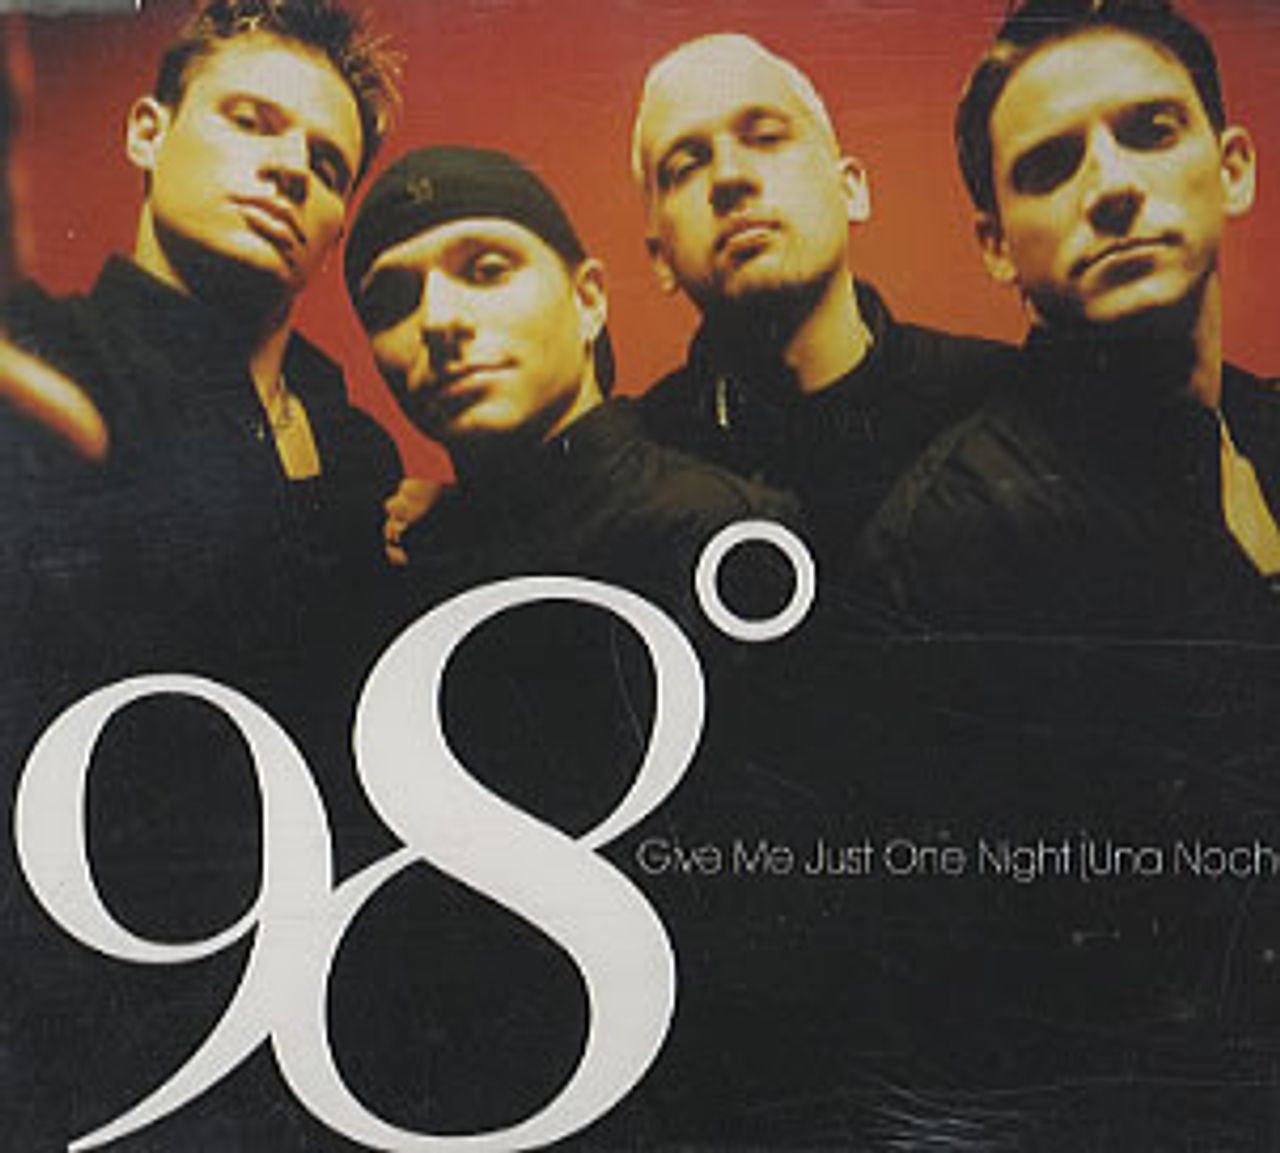 98 Degrees Give Me Just On Night Japanese Promo CD single